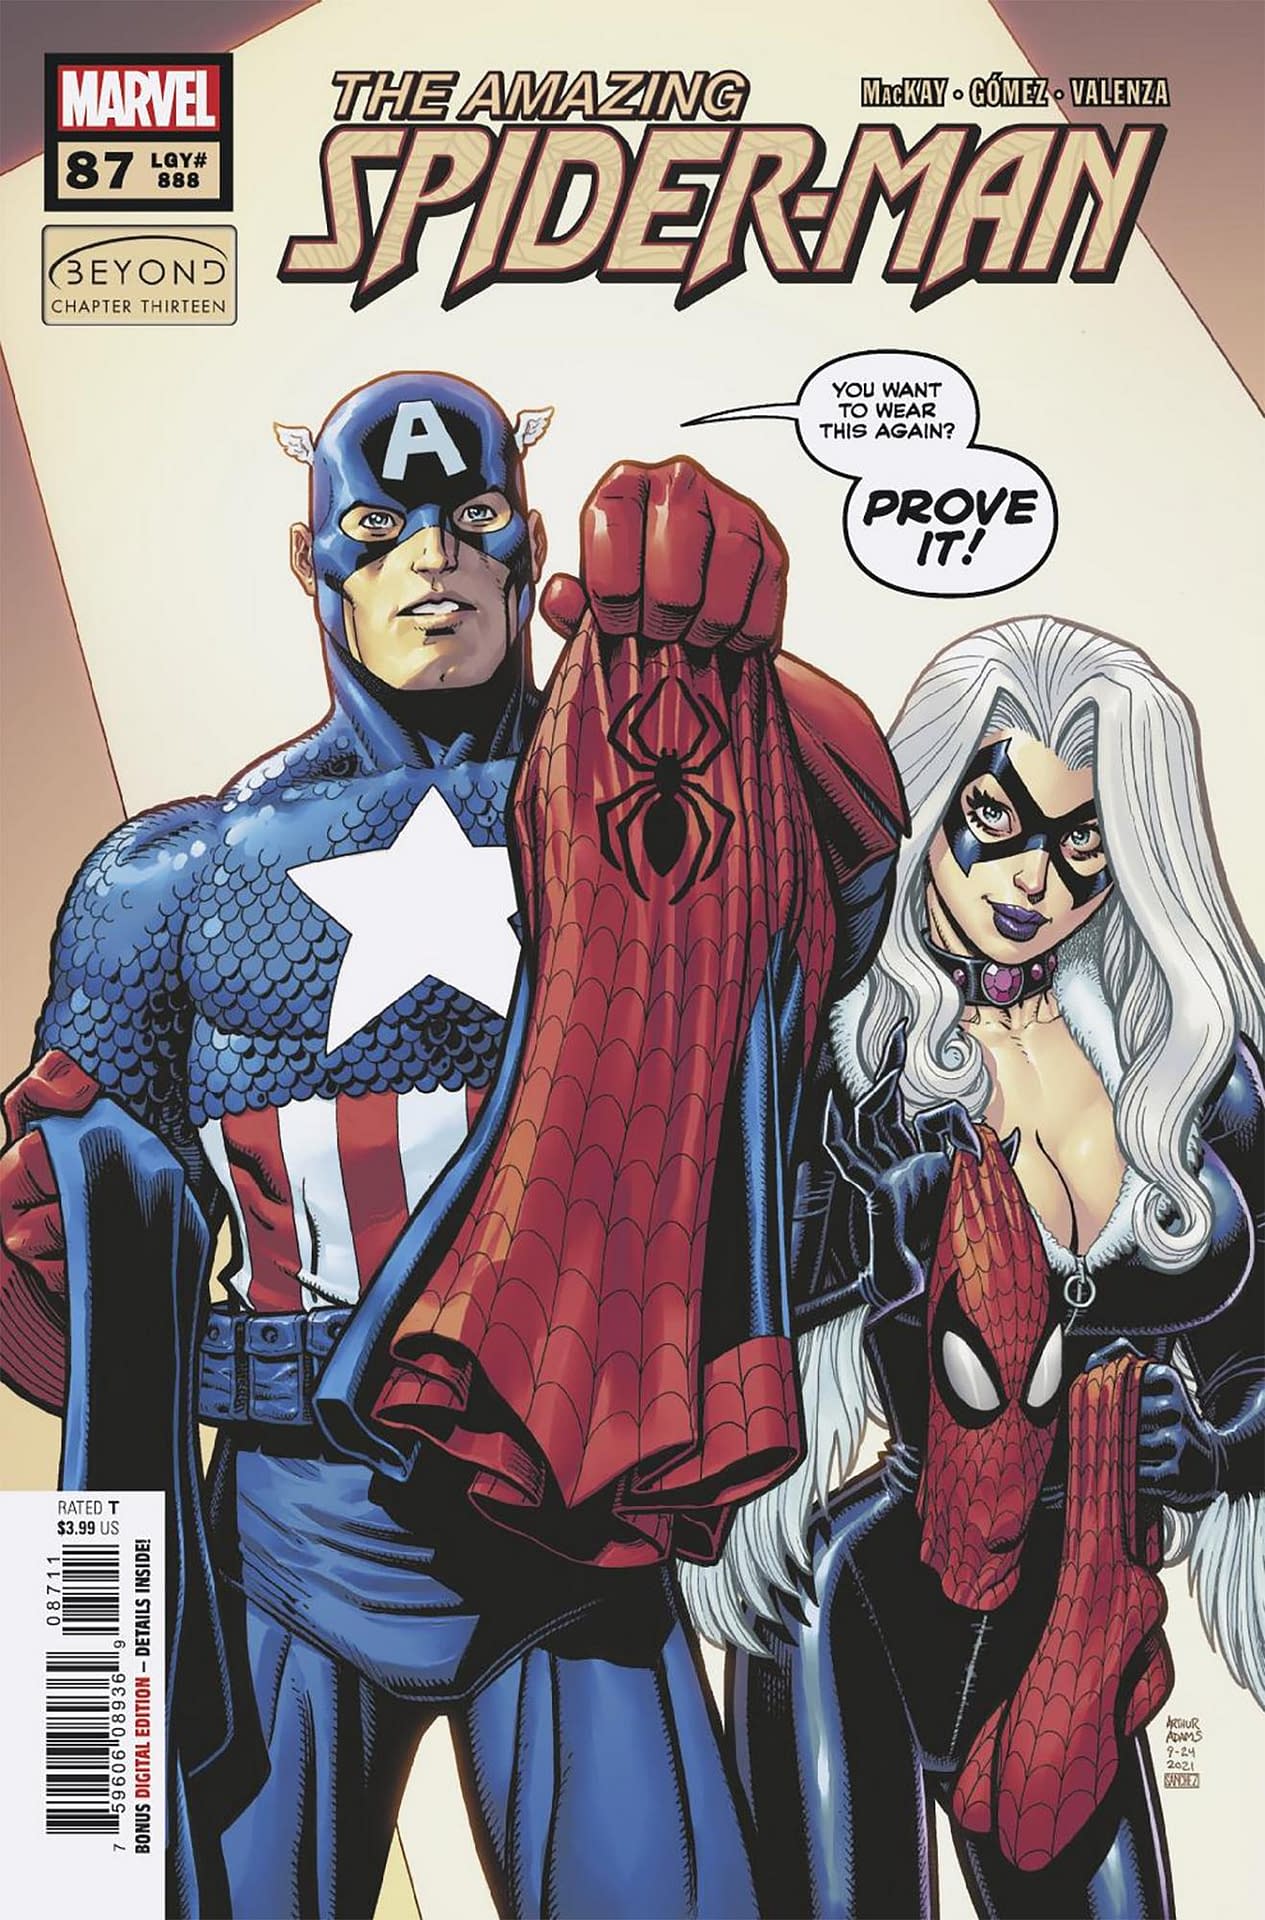 Black Cat trains Peter Parker with Steve Rogers [ASM 2018 #87, textless] :  r/Marvel